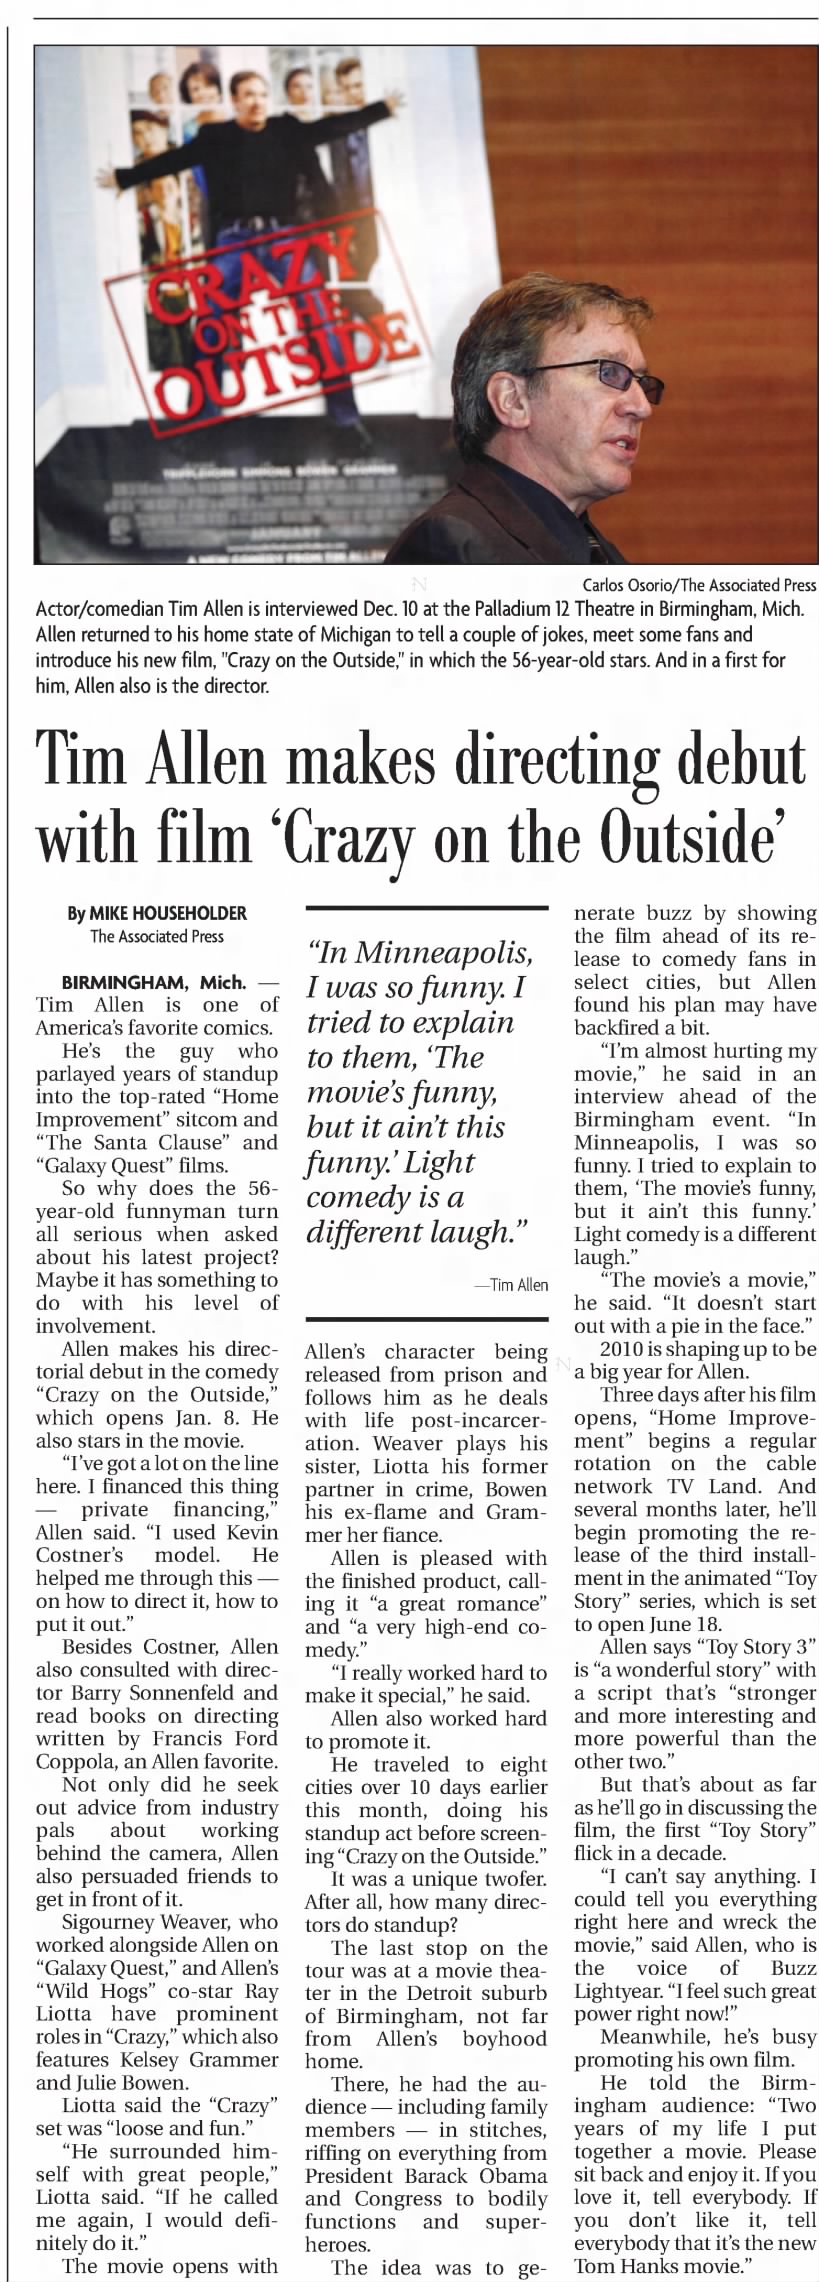 Mike Householder, "Tim Allen makes directing debut with film Crazy on the Outside."